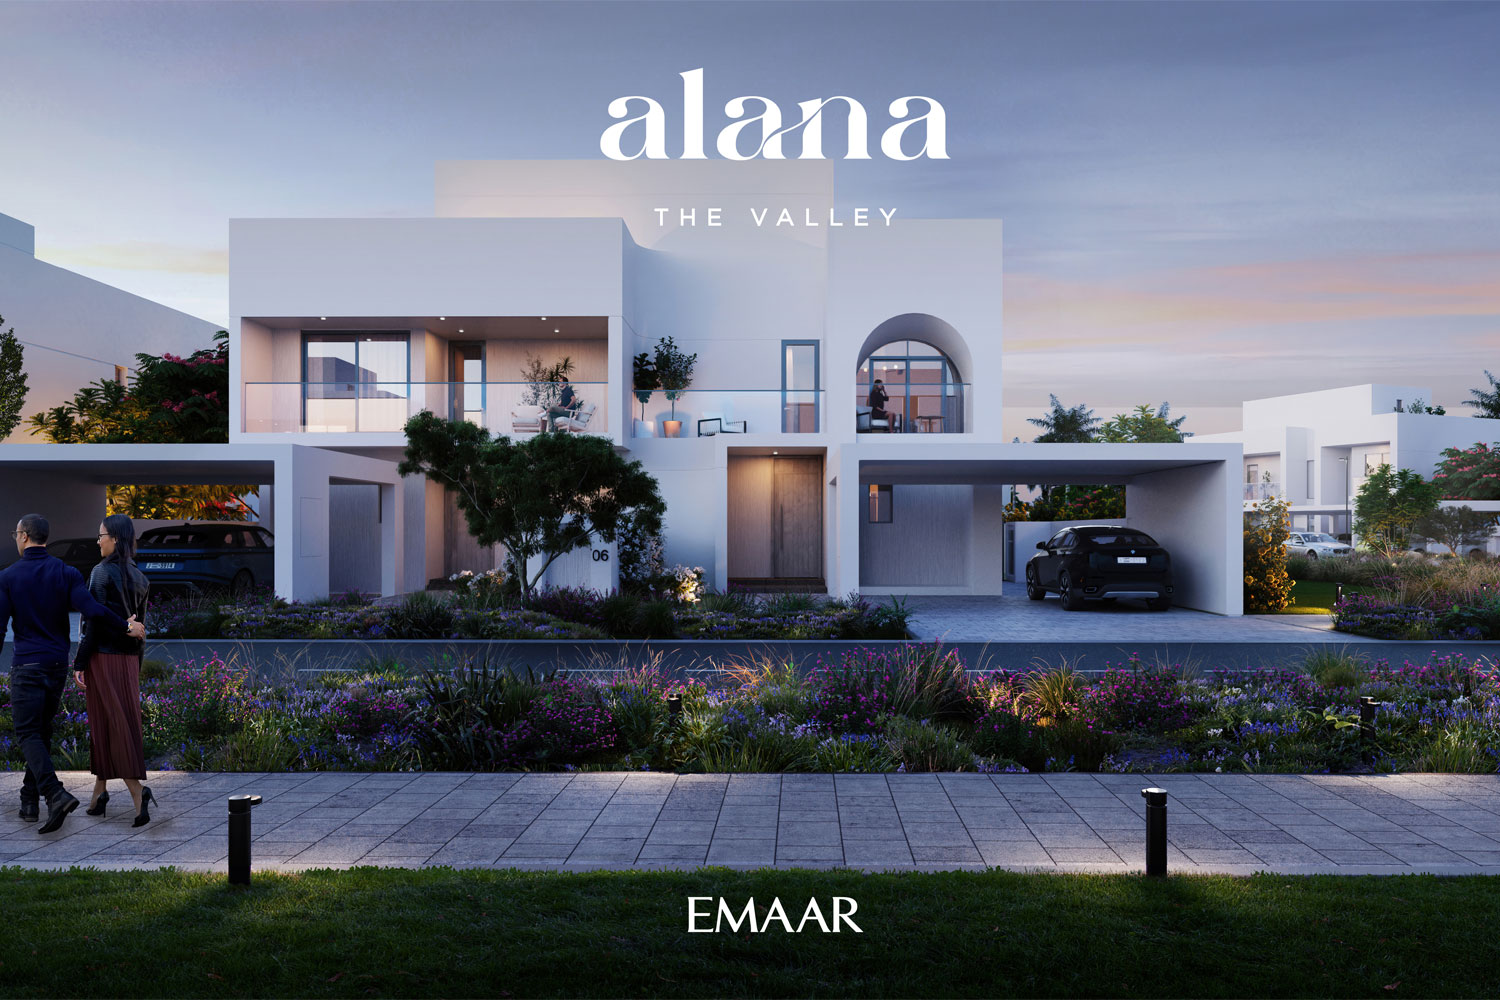 latest-project-in-dubai-alana-for-sale-in-the-valley